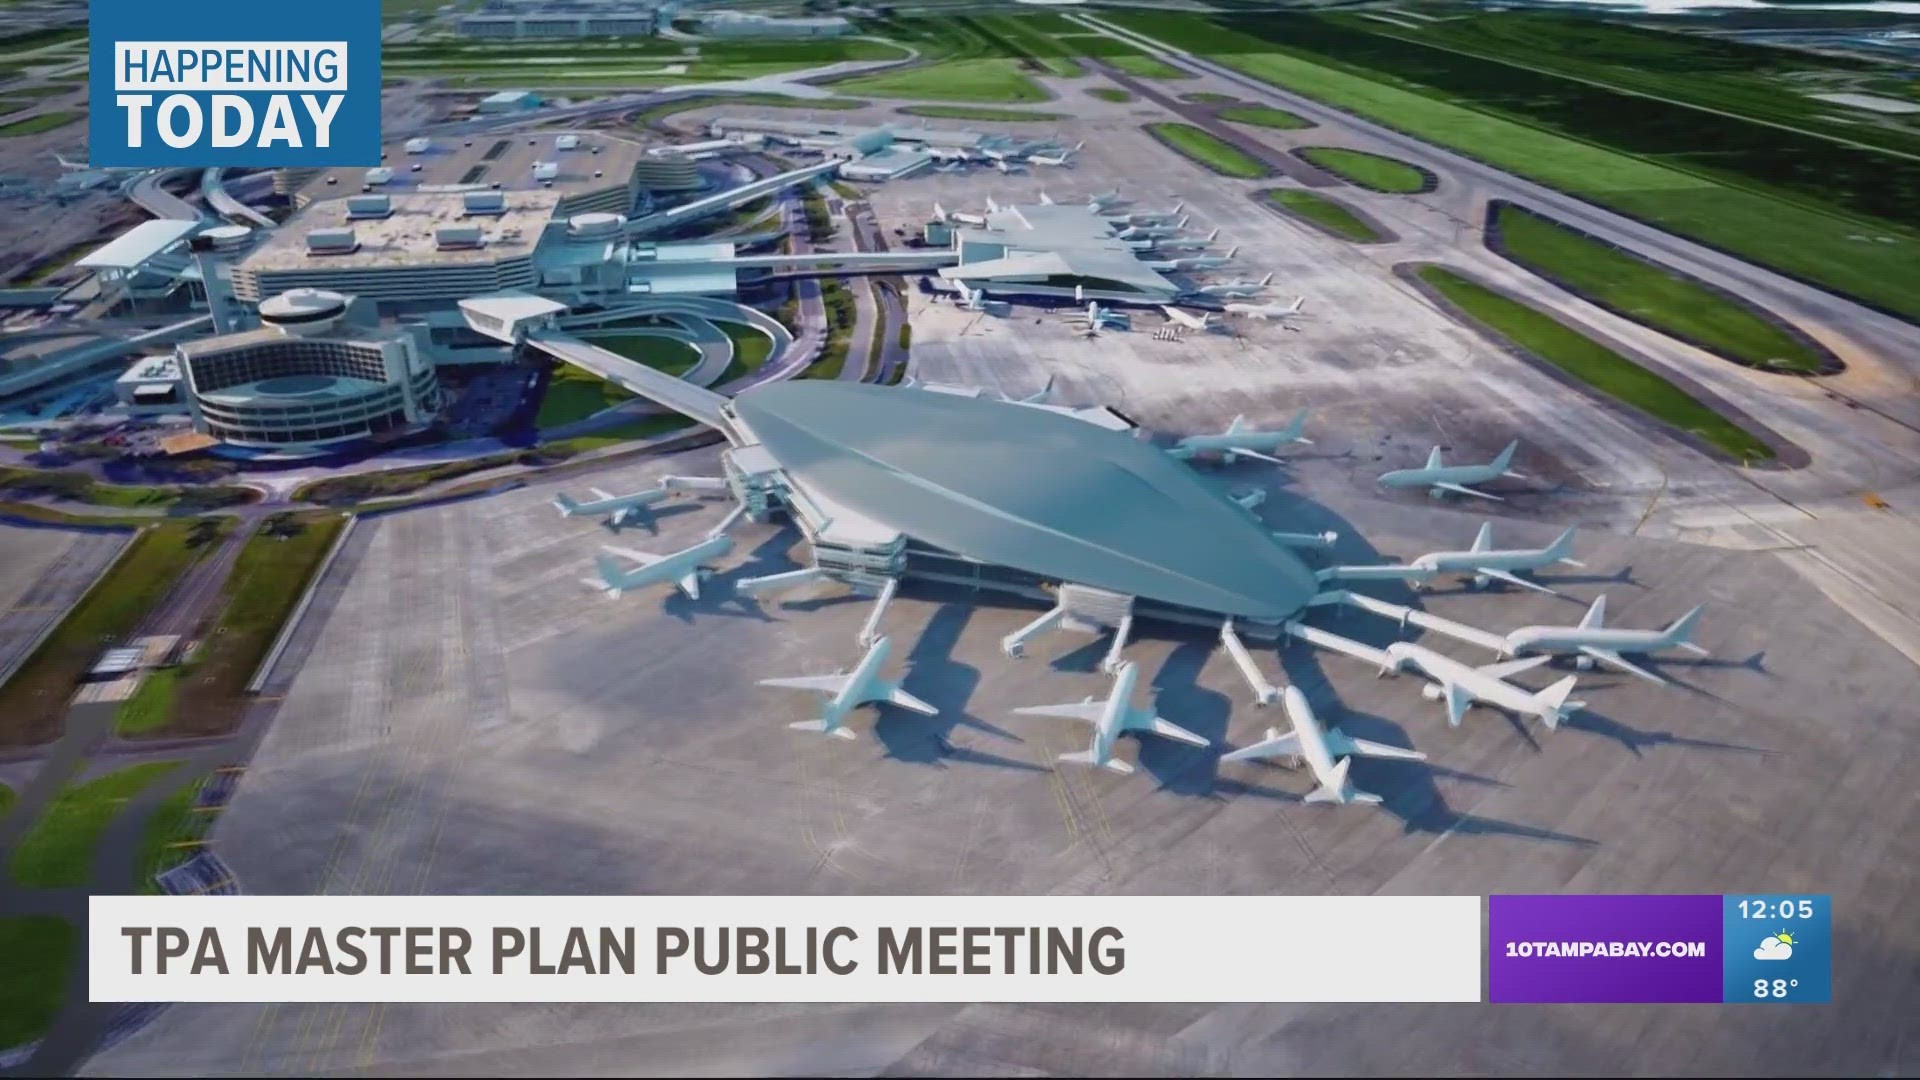 TPA is unveiling its plan for the next 20 years of development.